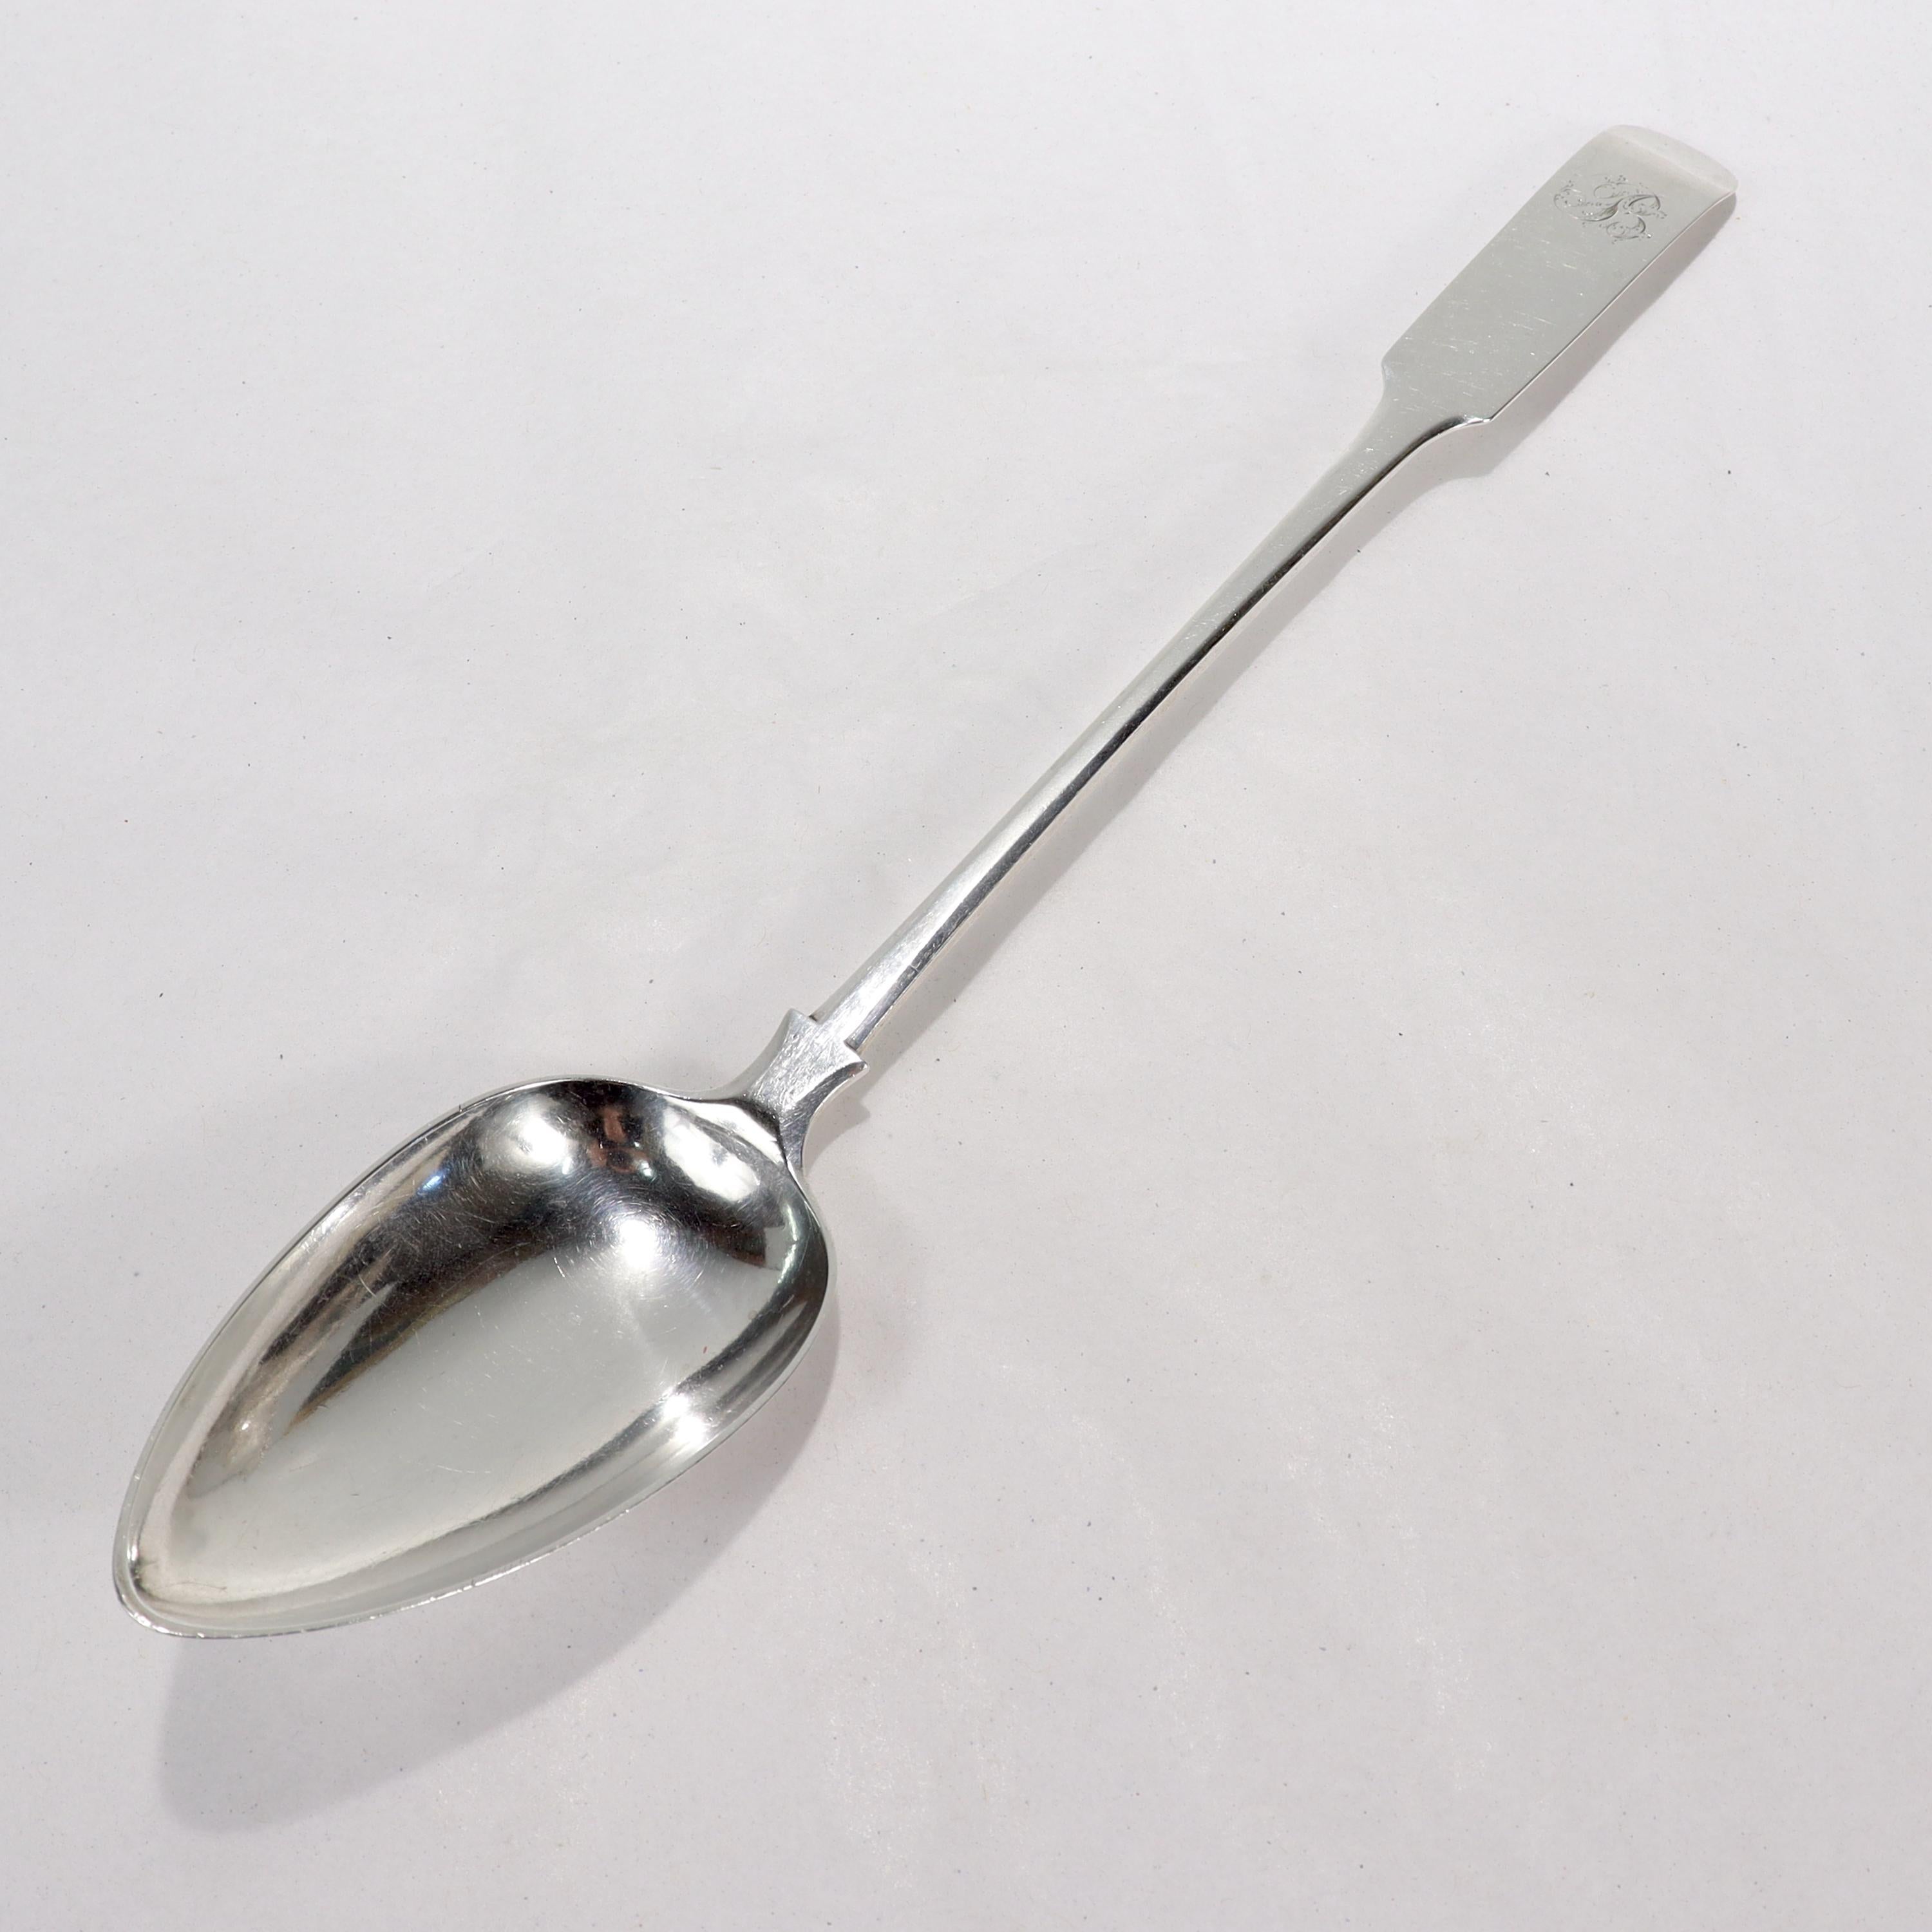 A fine antique fiddle pattern stuffing spoon.

In sterling silver.

By John Heron of Edinburgh, Scotland. 

Monogrammed to the handle with a 'B'. 

Simply a wonderful, rare Scottish period stuffing spoon!

Date:
1809

Overall Condition:
It is in